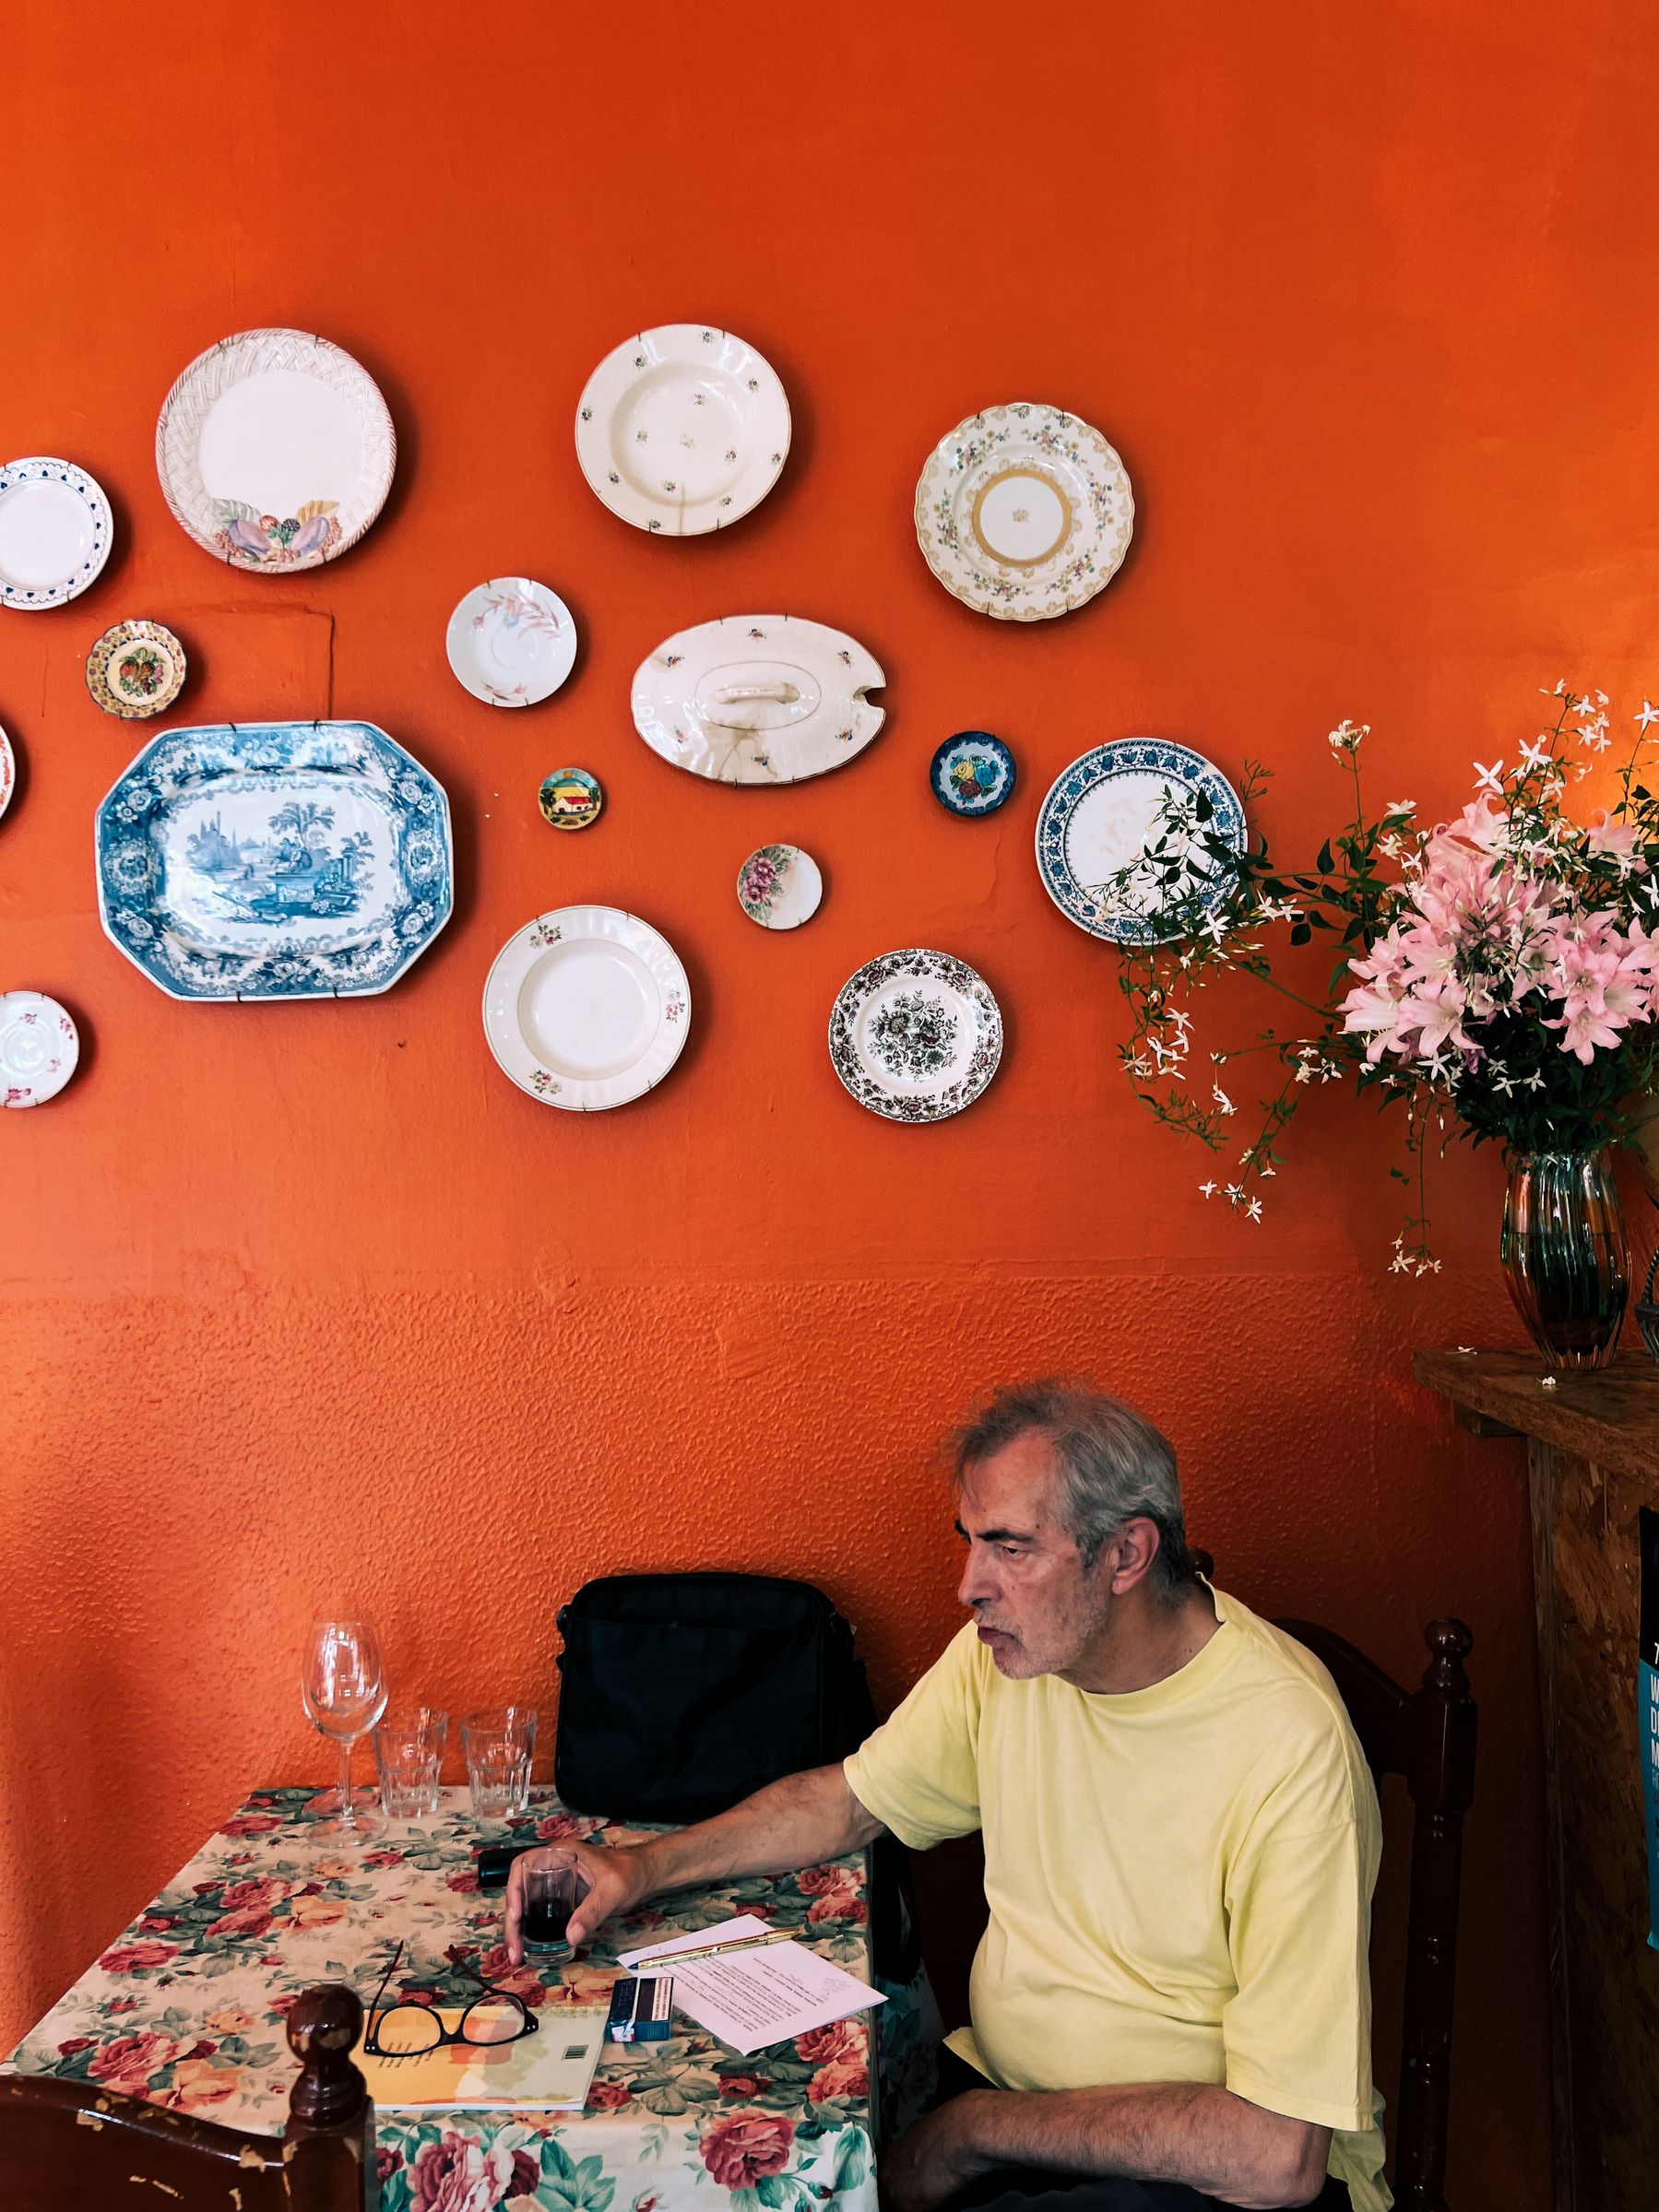 A man has a drink. Orange wall behind him, with hanging plates.